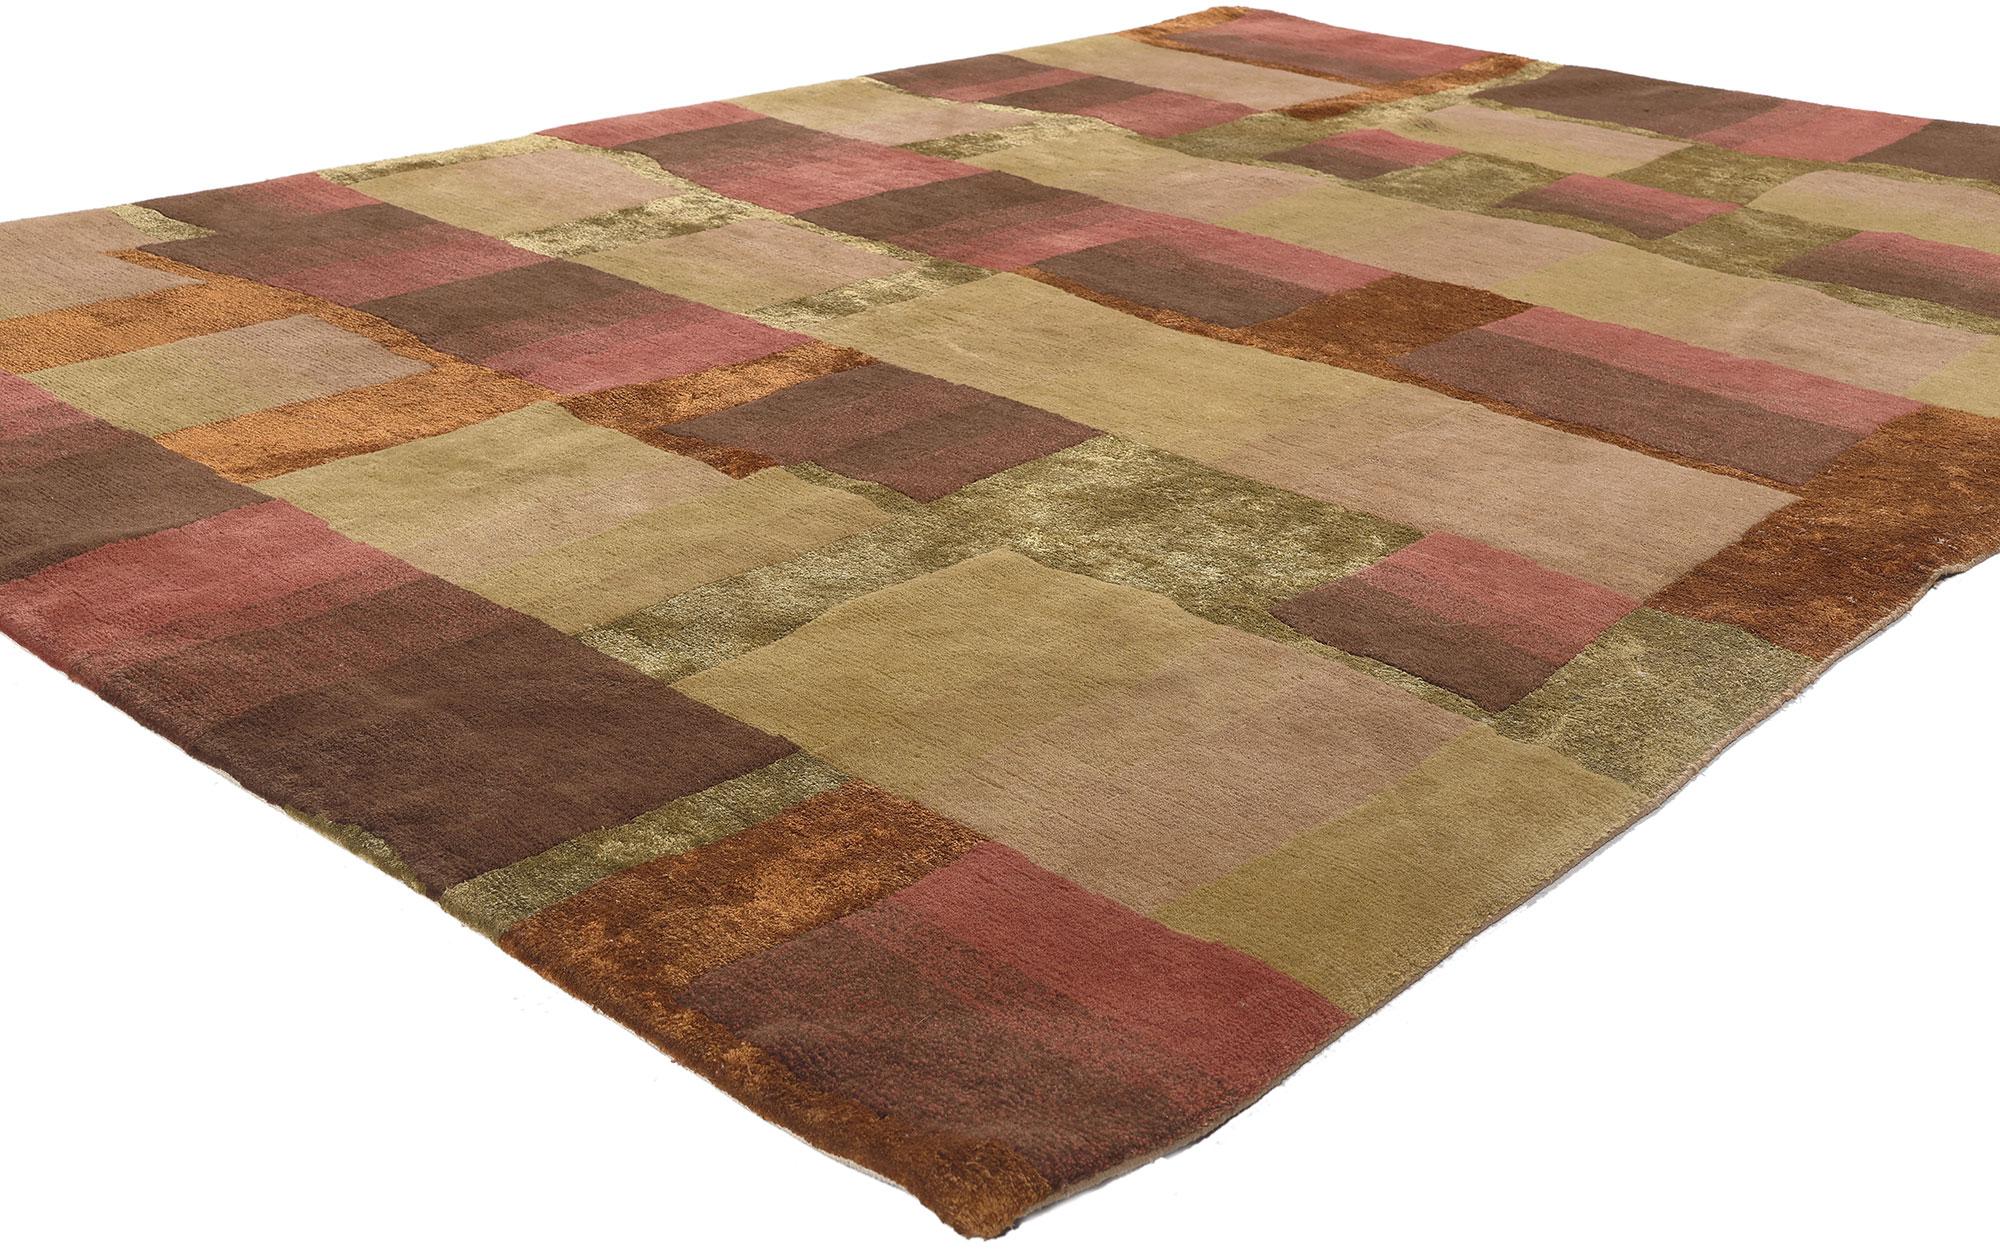 78532 Tibetan Wool & Silk Rug, 05'07 x 07'11.
Emanating a mosaic design with incredible detail and texture, this wool and silk Tibetan rug is a captivating vision of woven beauty. The cubist mirage and earthy colorway woven into this piece work